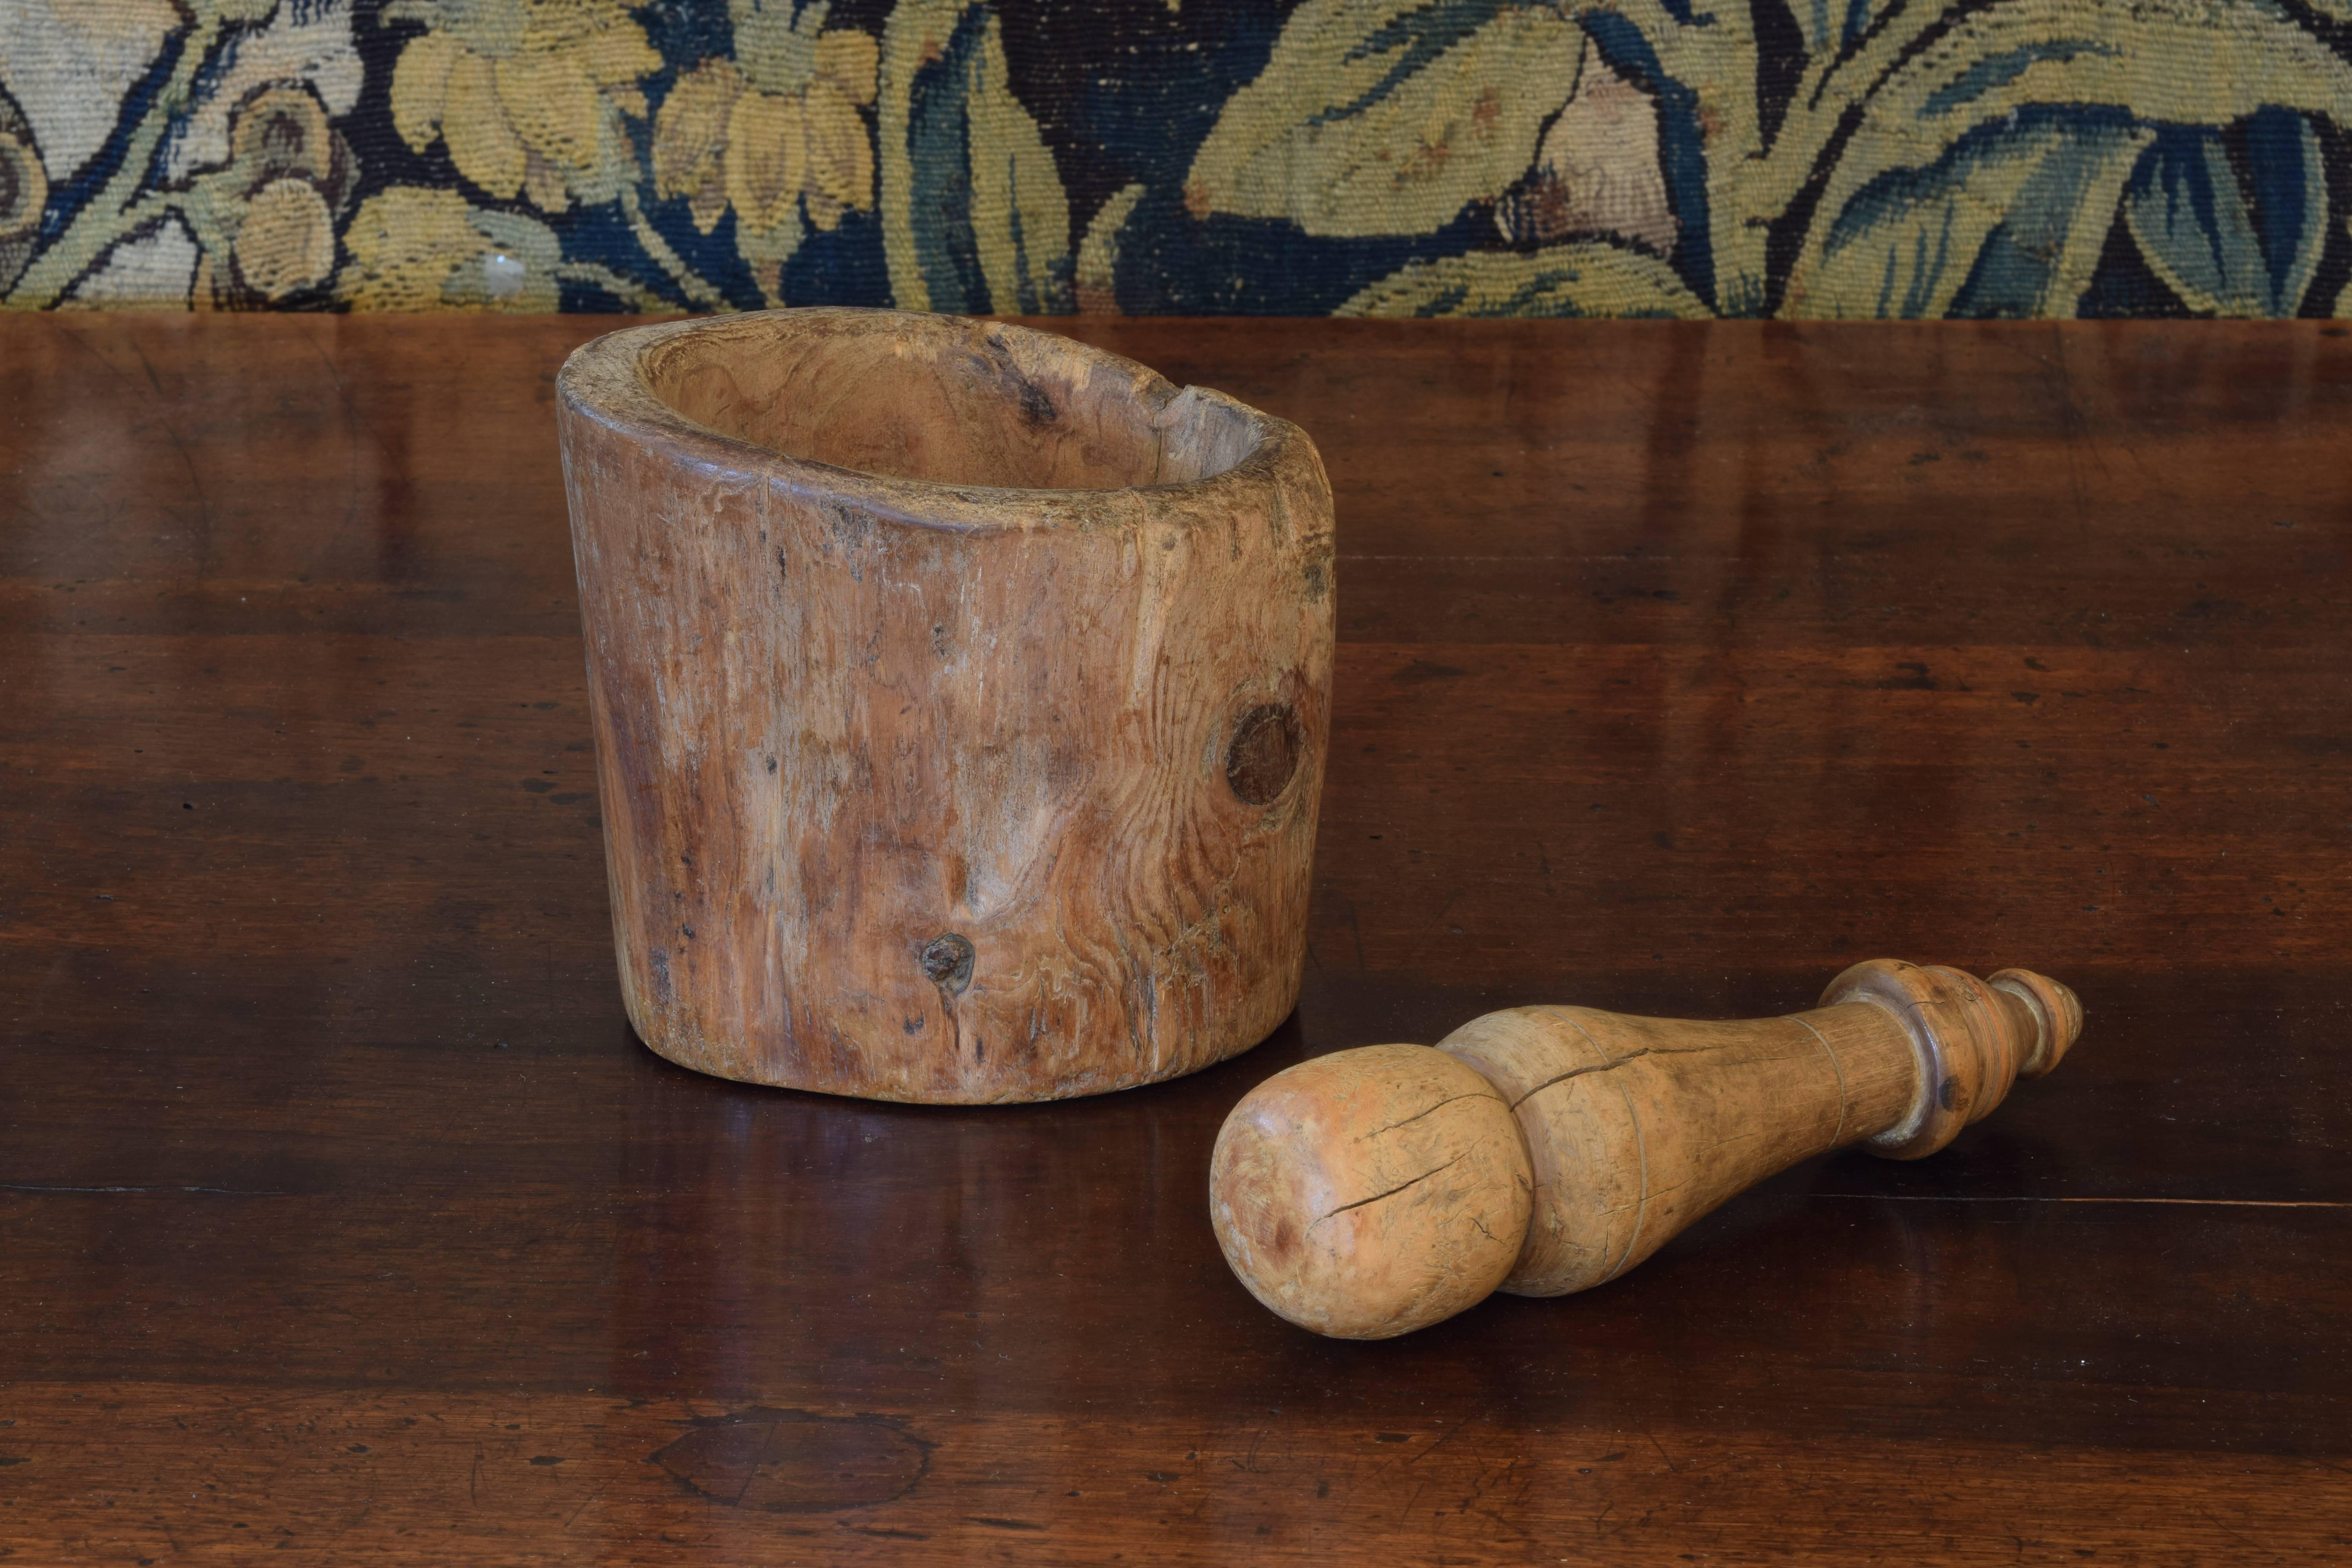 The hollowed branch carved to form the mortar, length of the turned pestle is 8 inches, both made of boxwood.